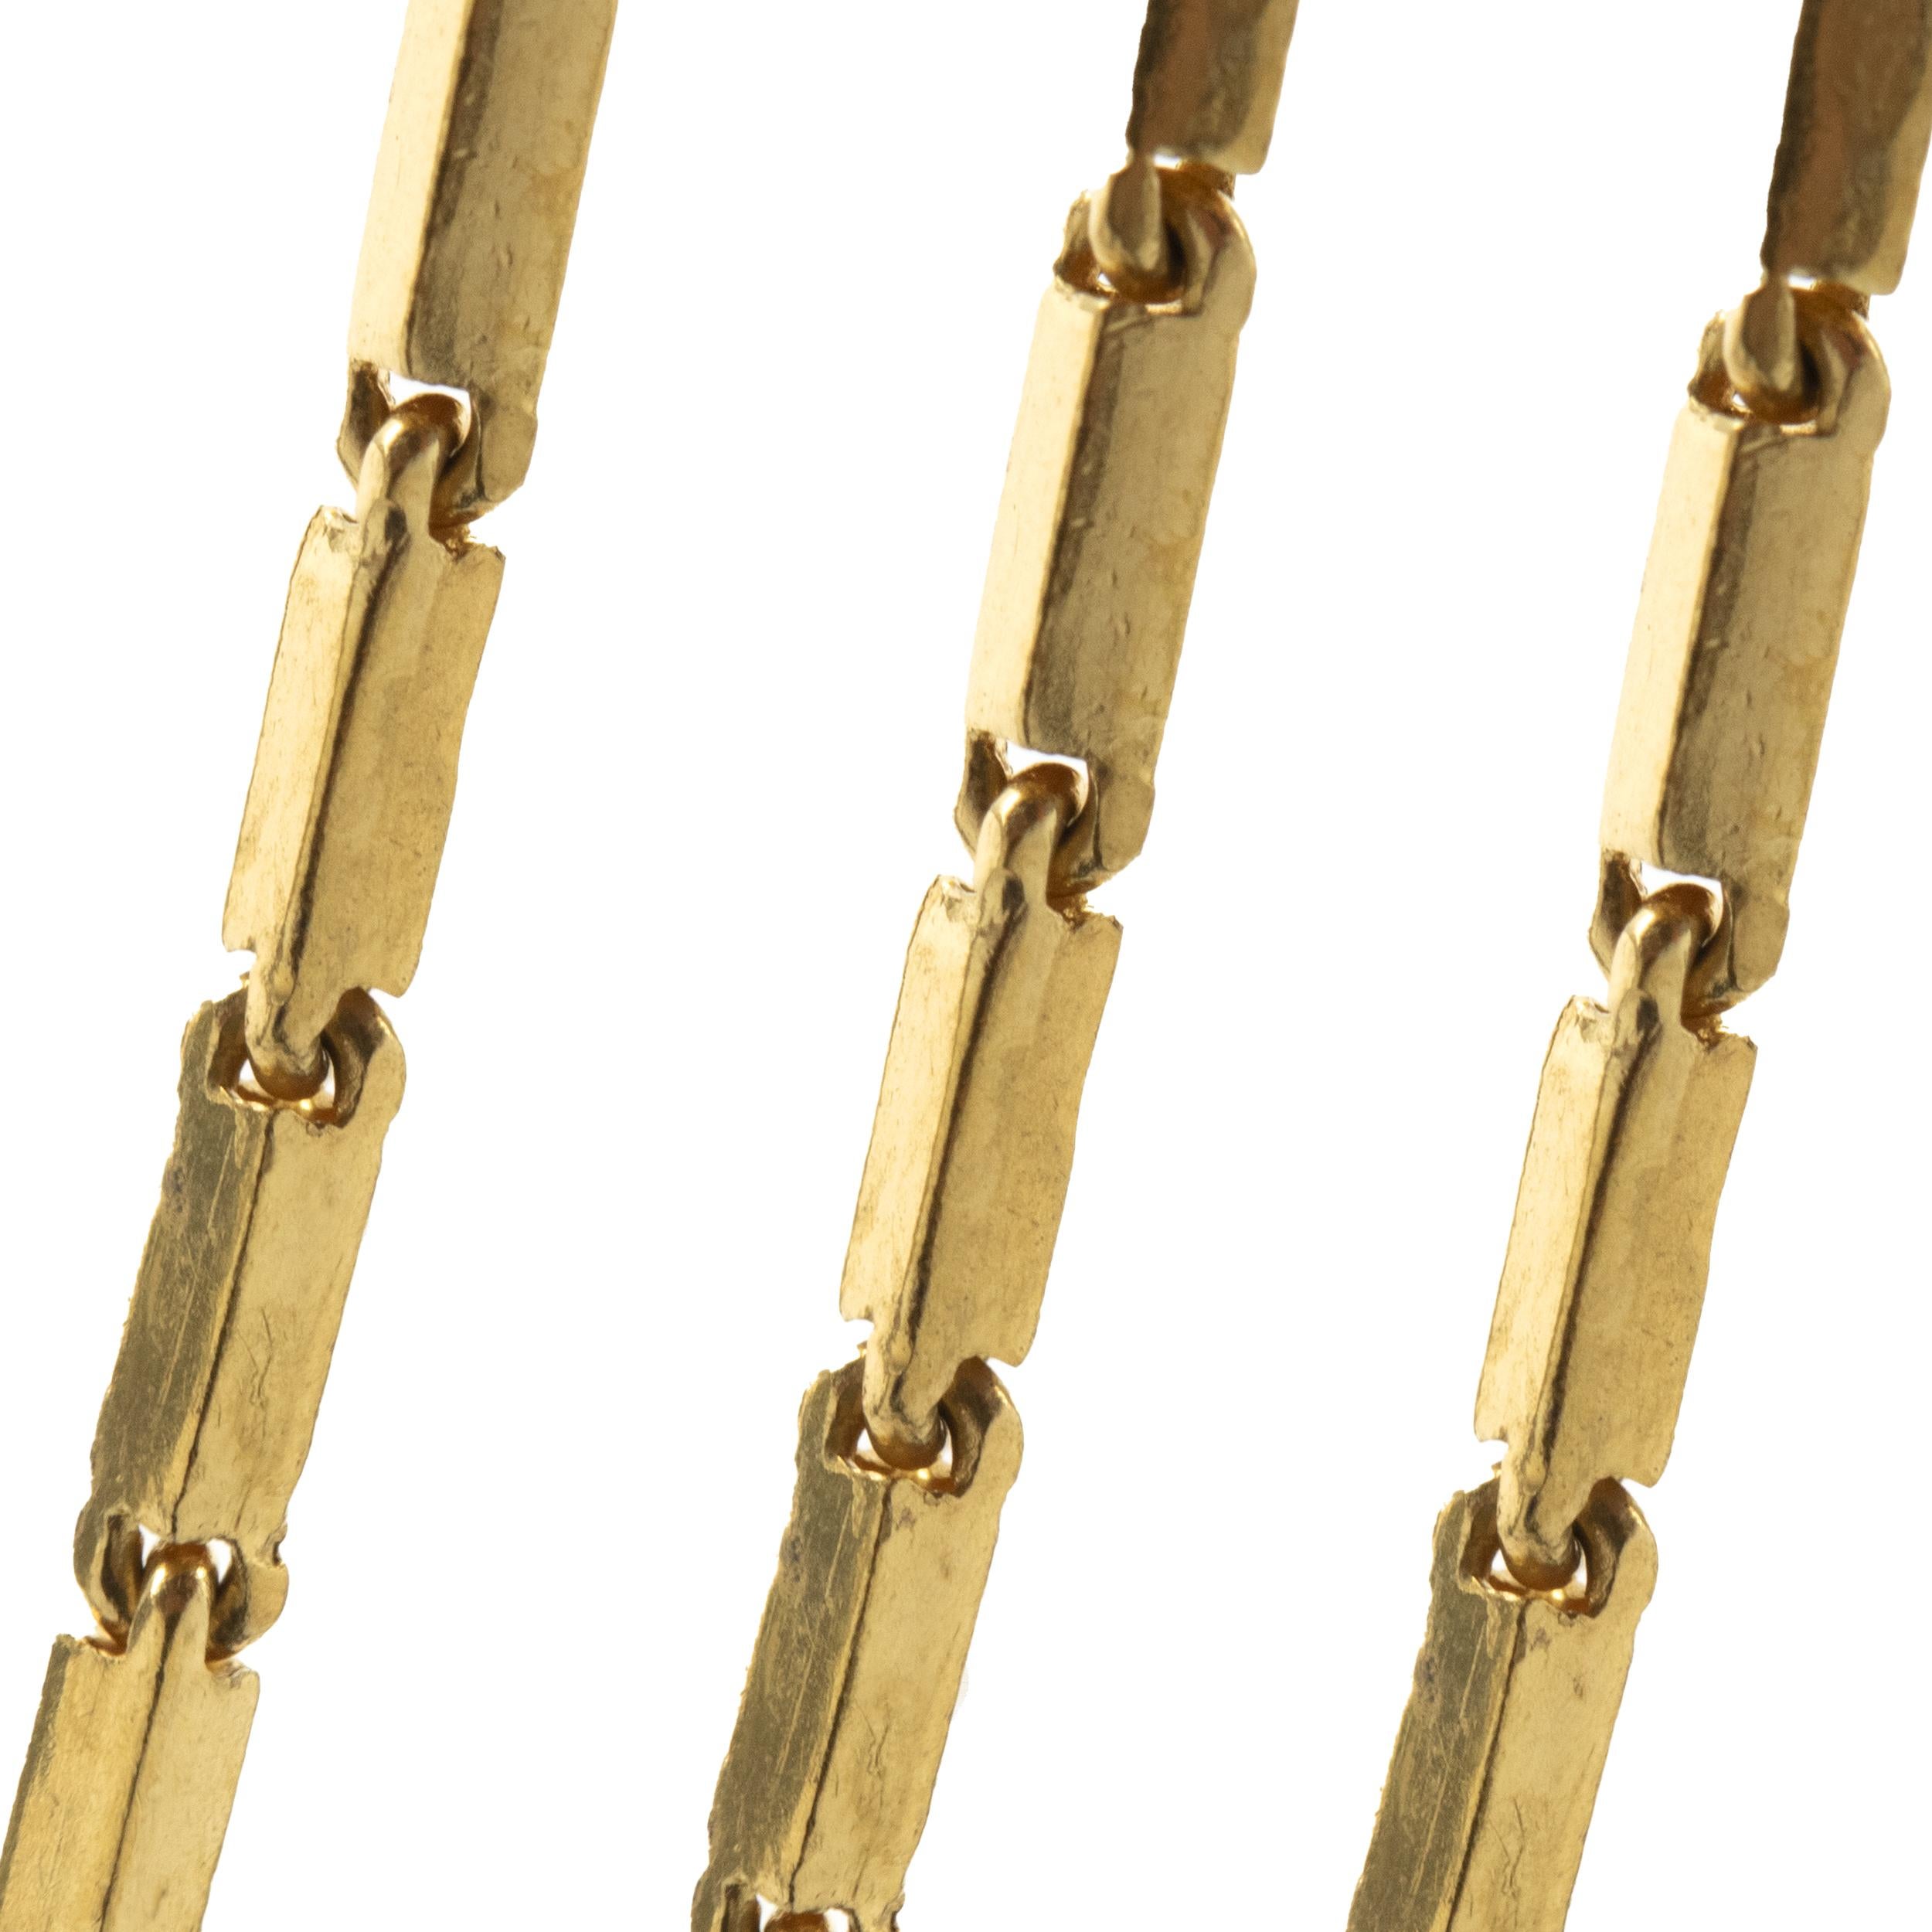 Material: 24K yellow gold
Dimensions: necklace measures 19-inches in length, 1.3mm wide
Weight: 7.39 grams
